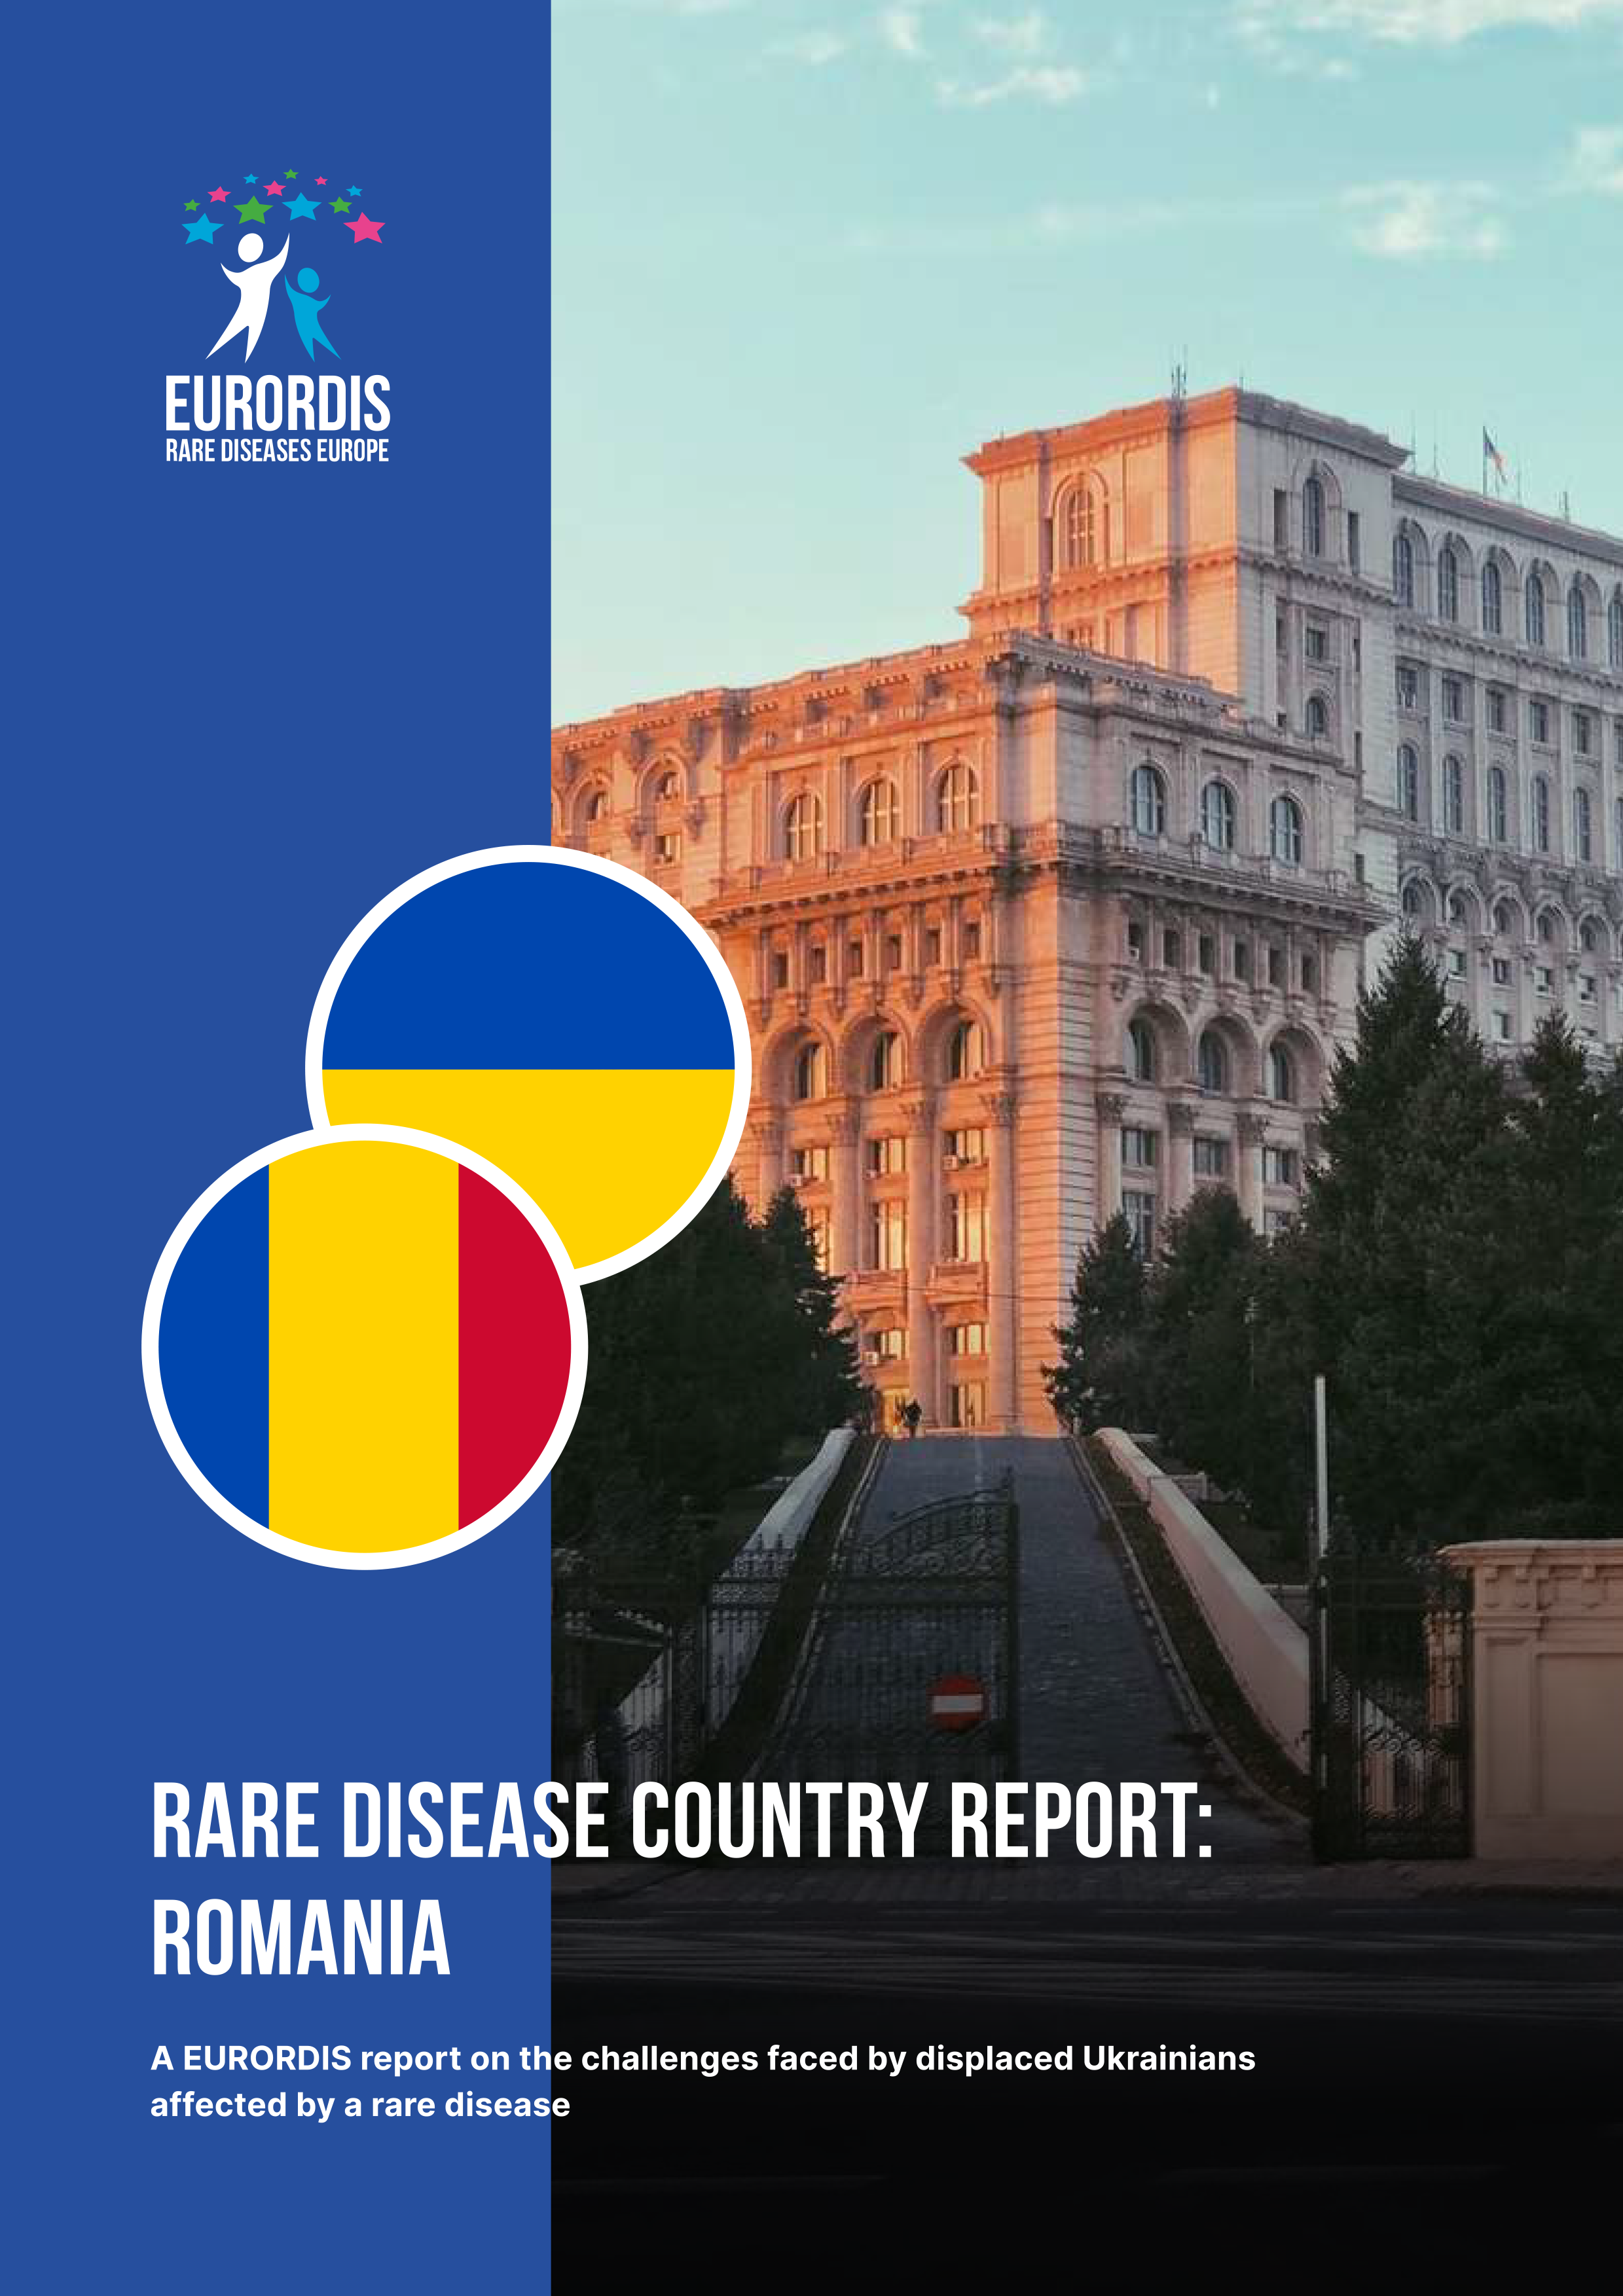 A EURORDIS report on the challenges faced by displaced Ukrainians affected by a rare disease – Romania